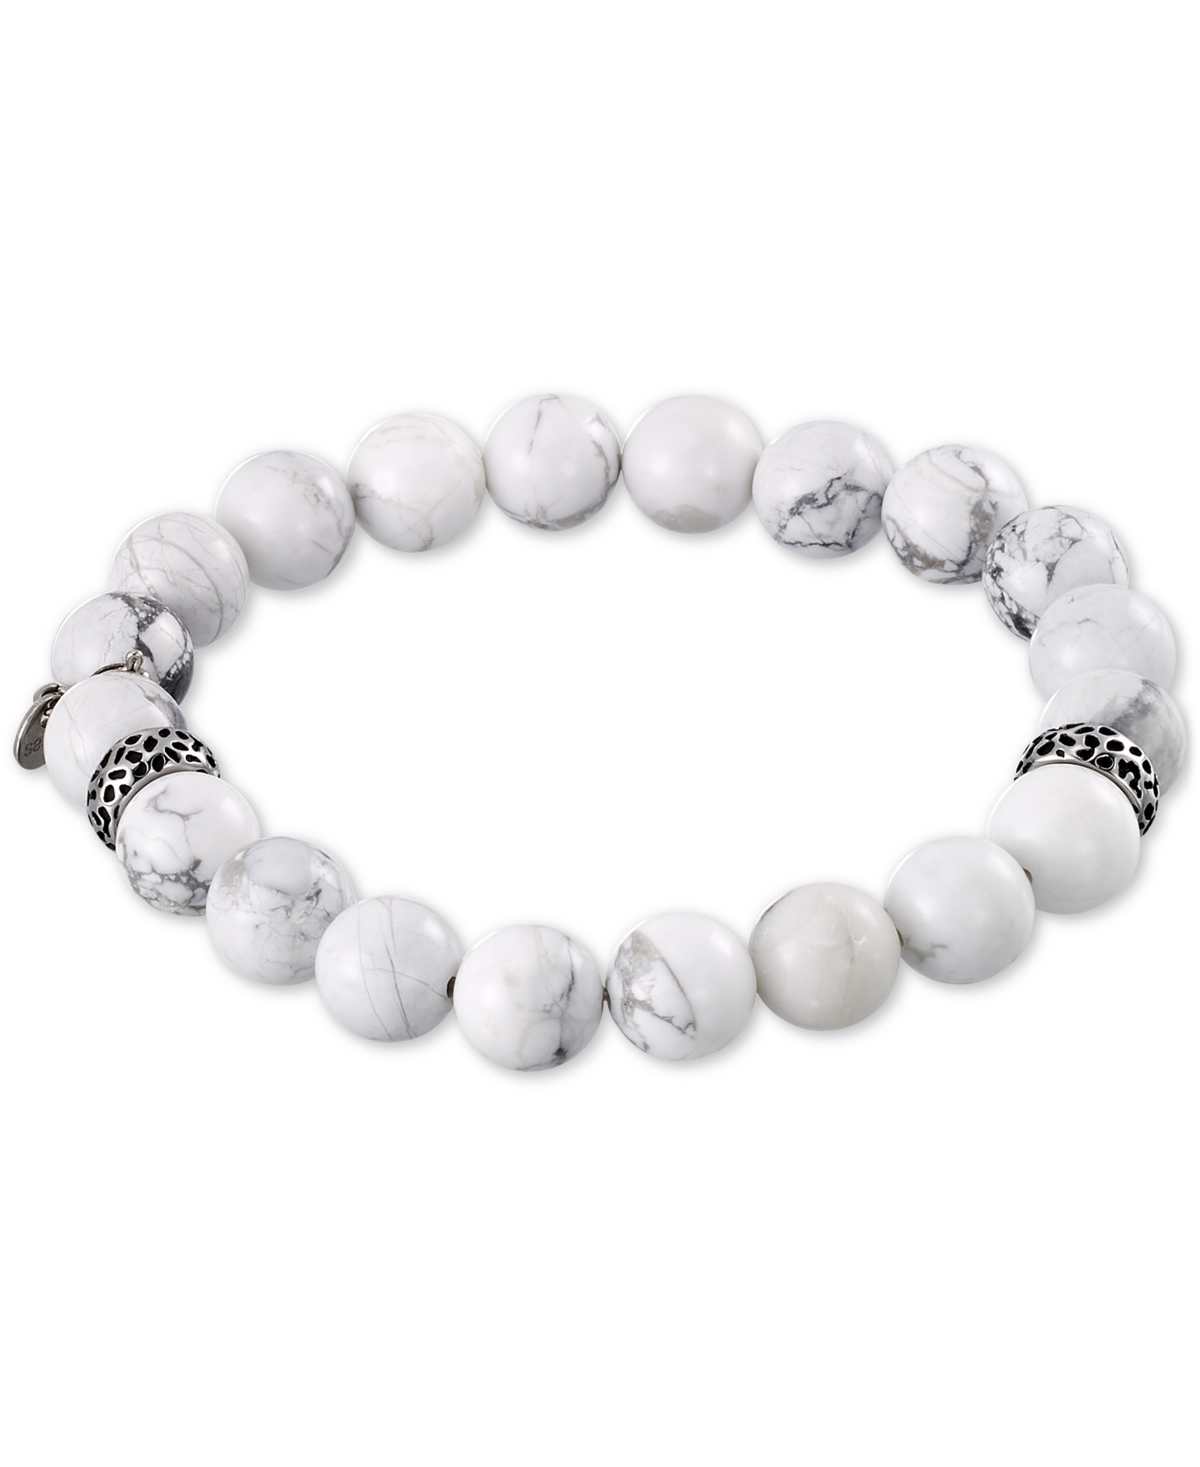 Legacy for Men by Simone I. Smith White Agate (10mm) Beaded Stretch Bracelet in Stainless Steel